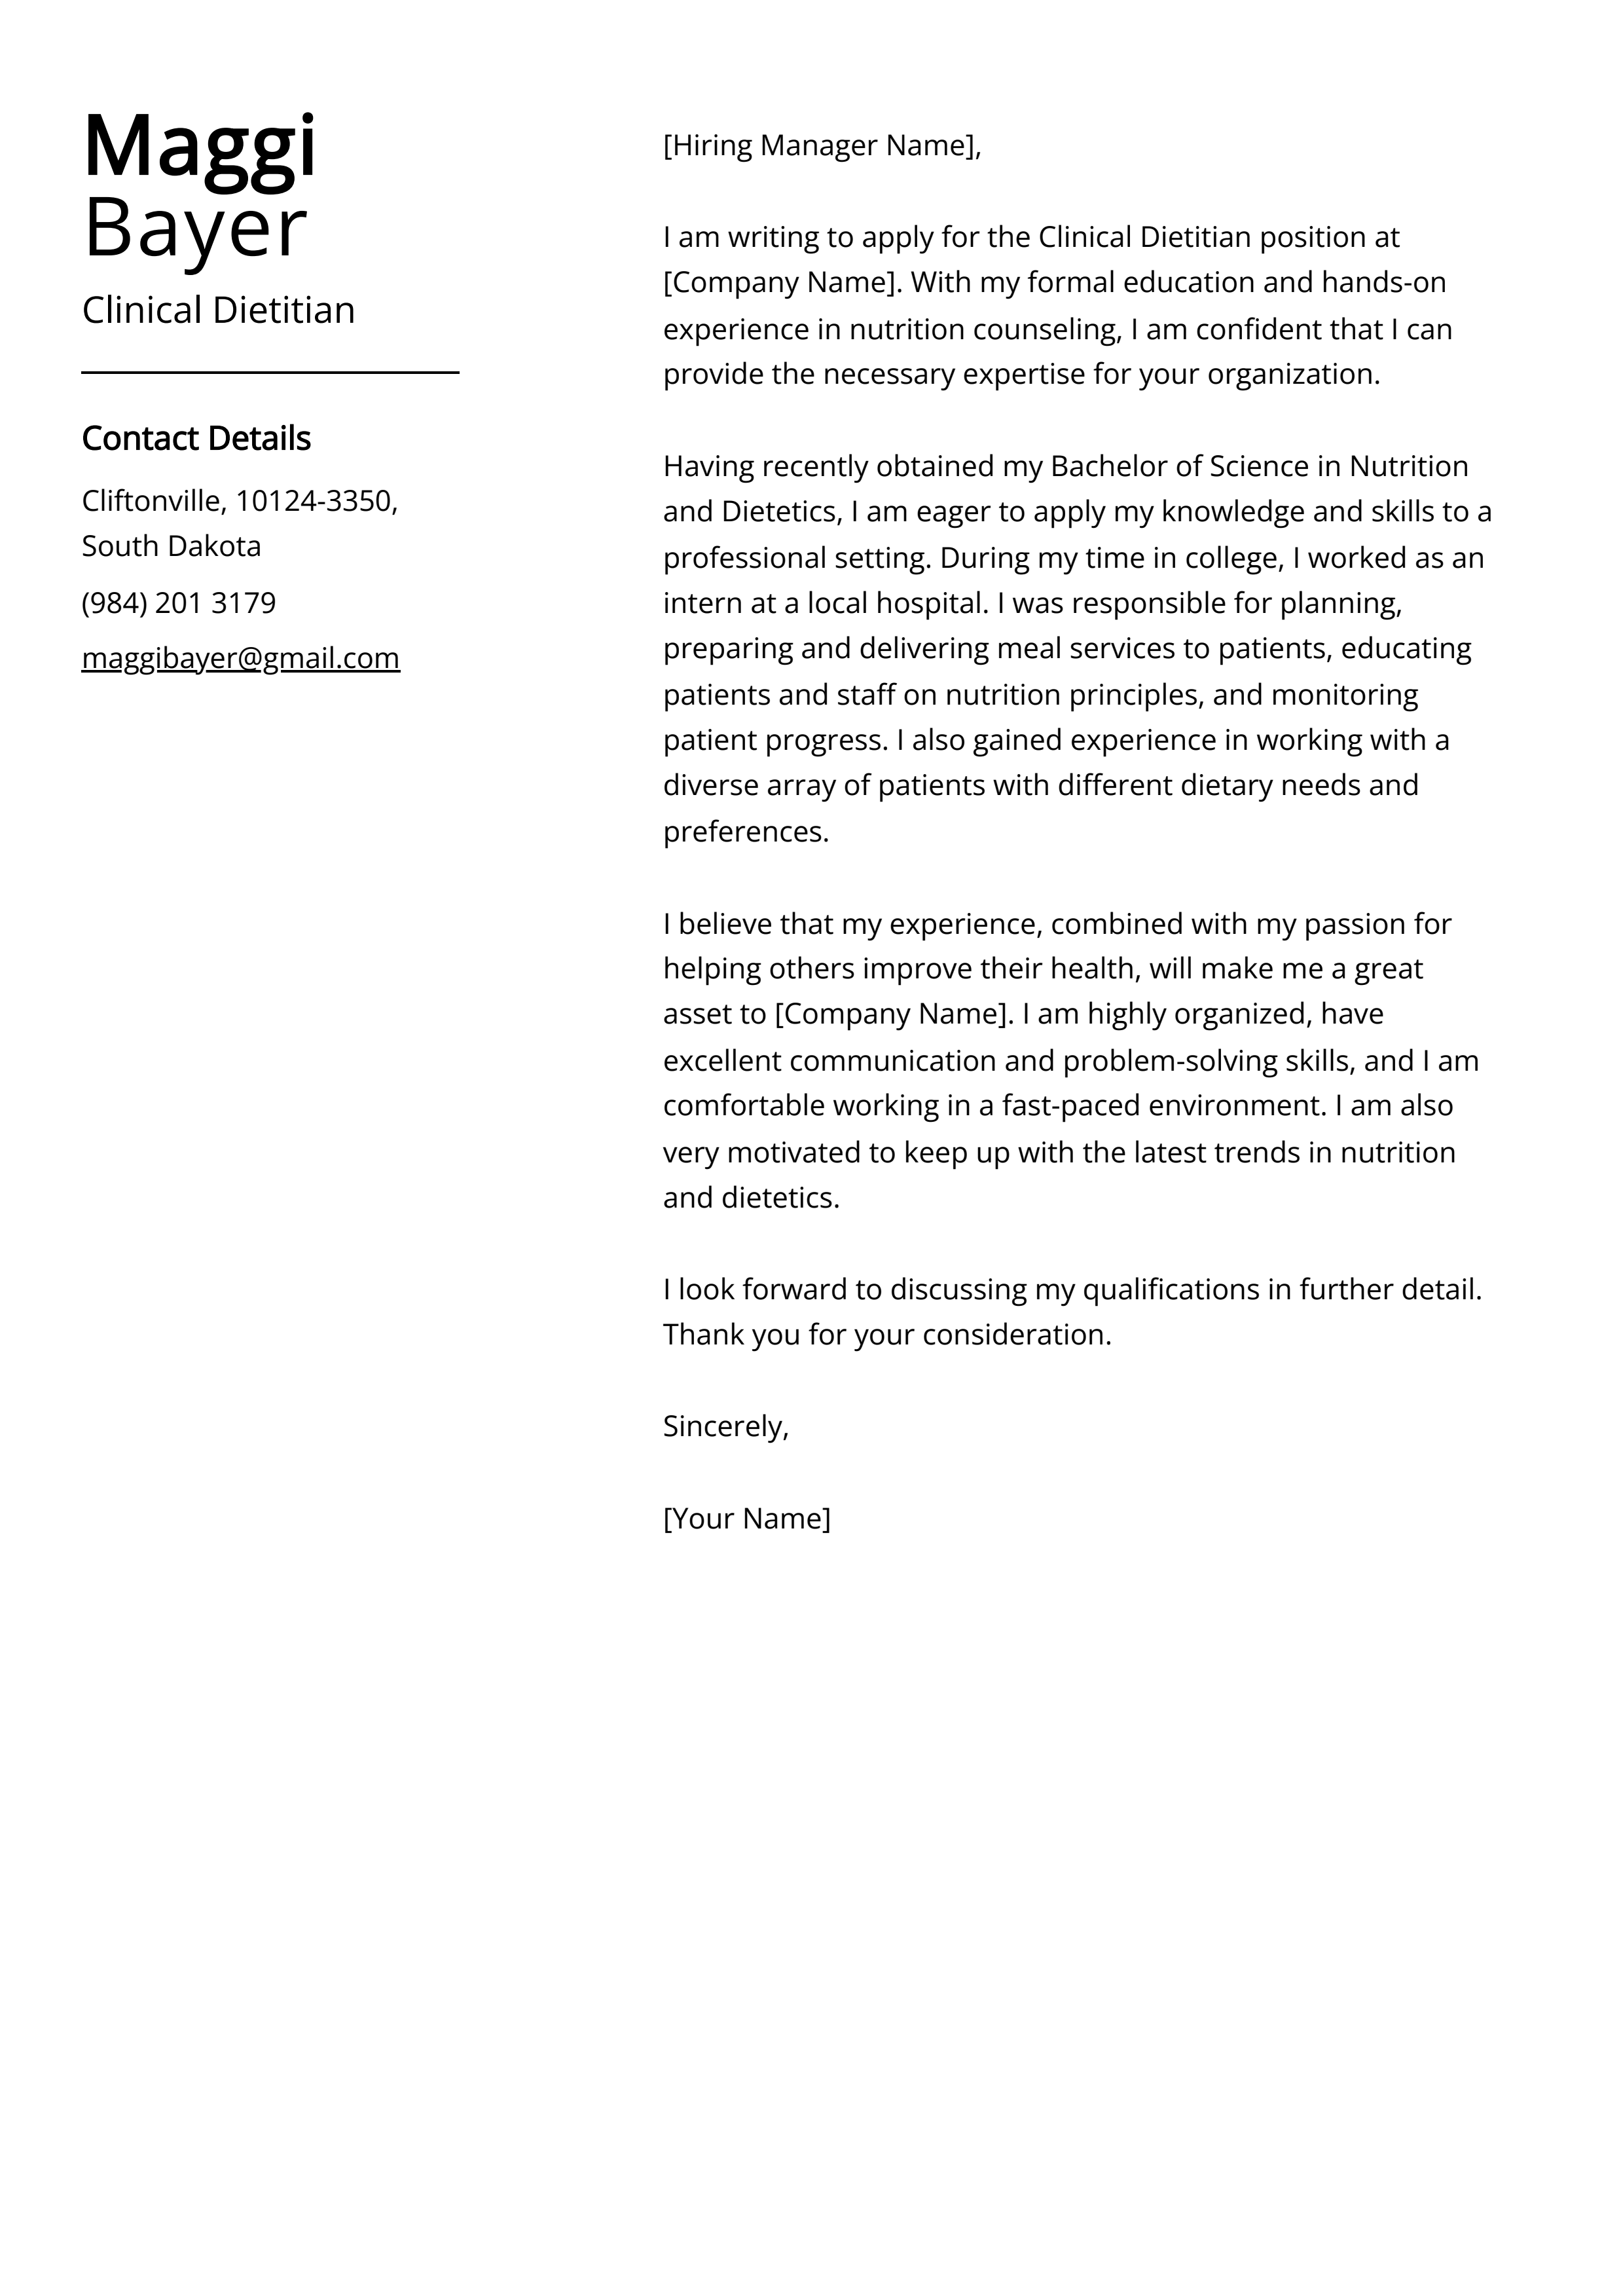 Clinical Dietitian Cover Letter Example